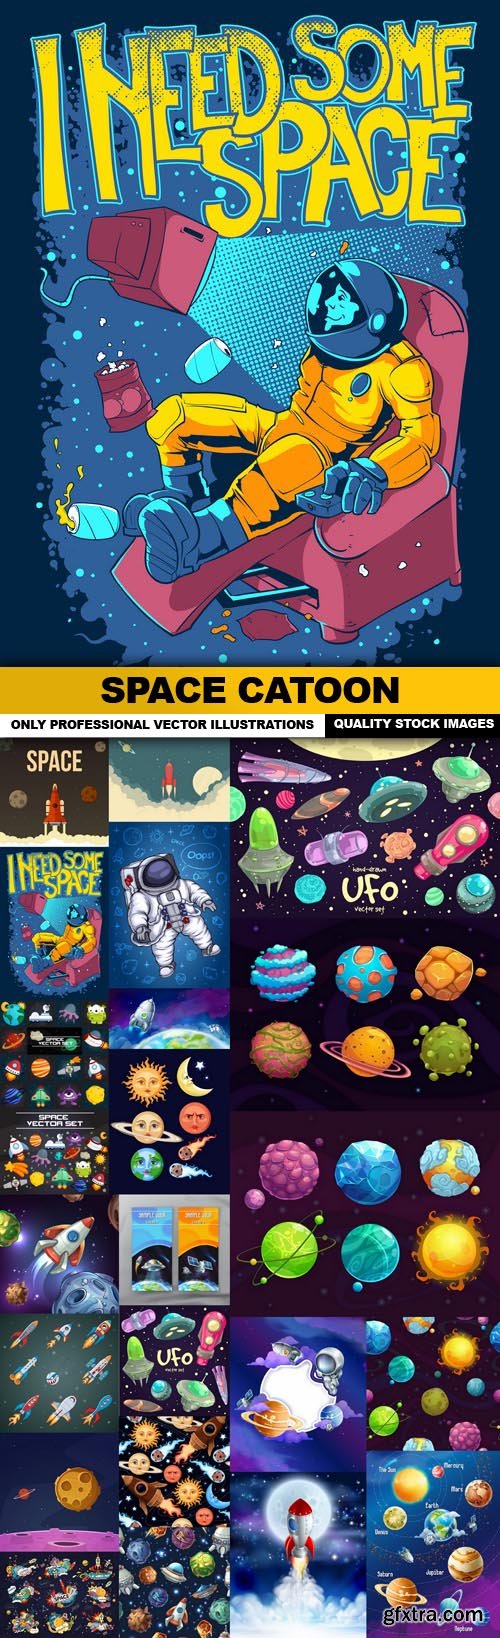 Space Catoon - 25 Vector